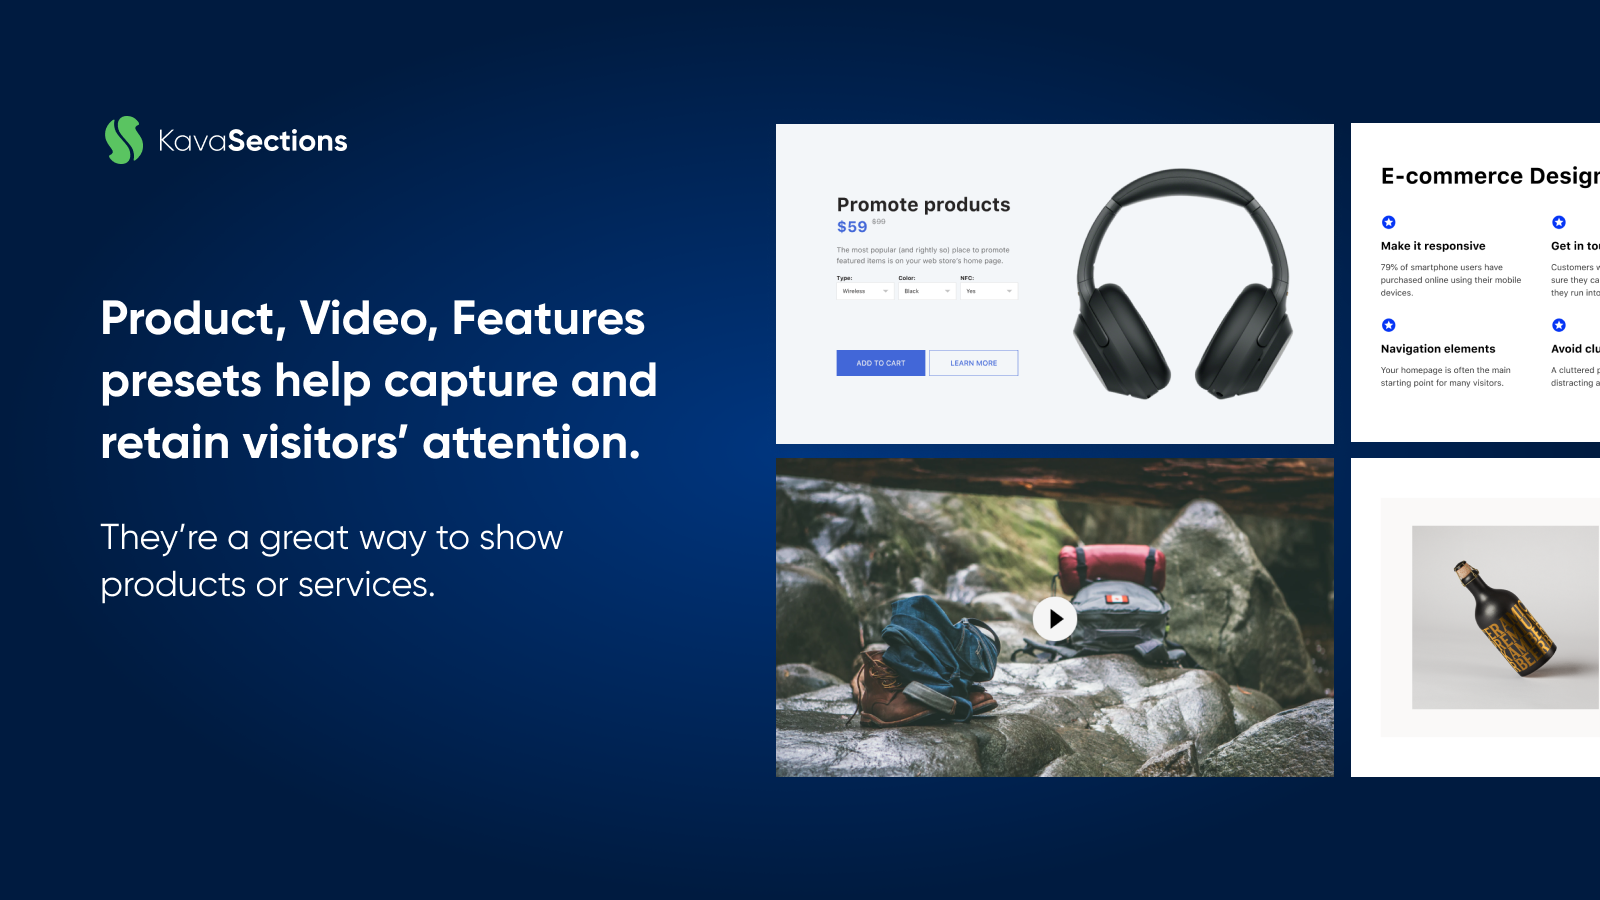 Product, Video, Features presets.